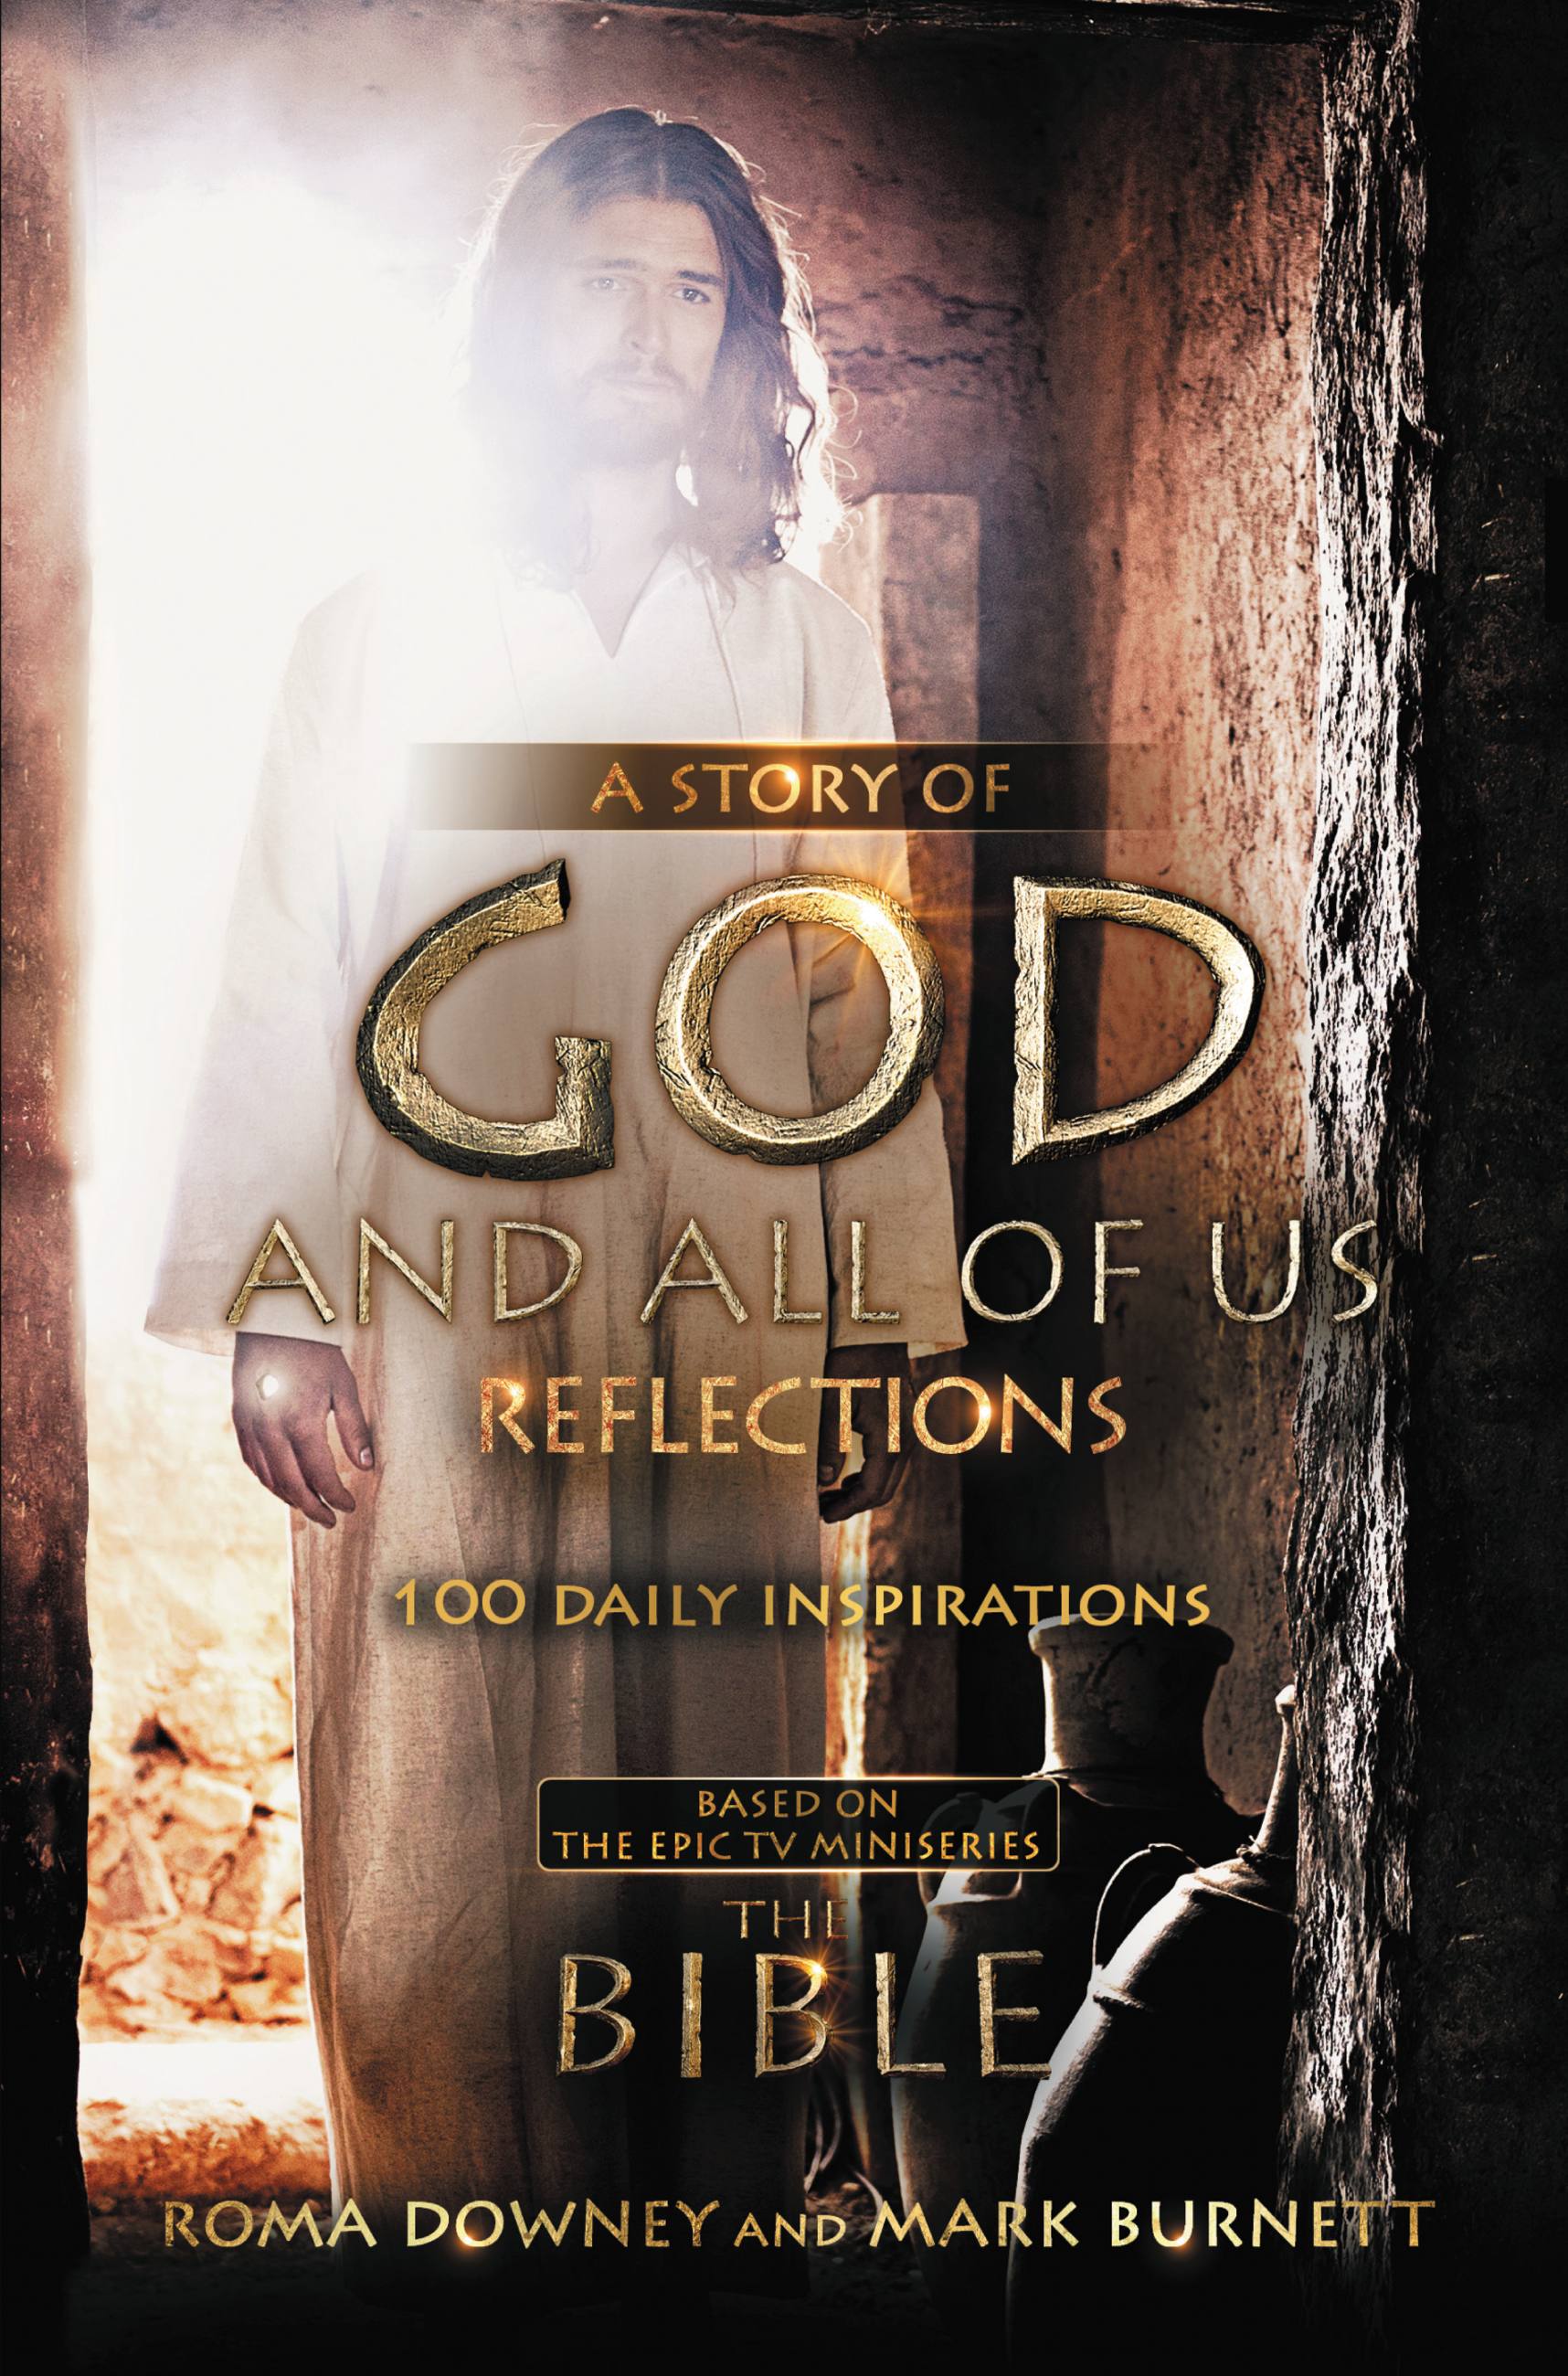 A Story of God and All of Us Reflections : 100 Daily Inspirations based on the Epic TV Miniseries "The Bible" (Hardcover) - image 1 of 1